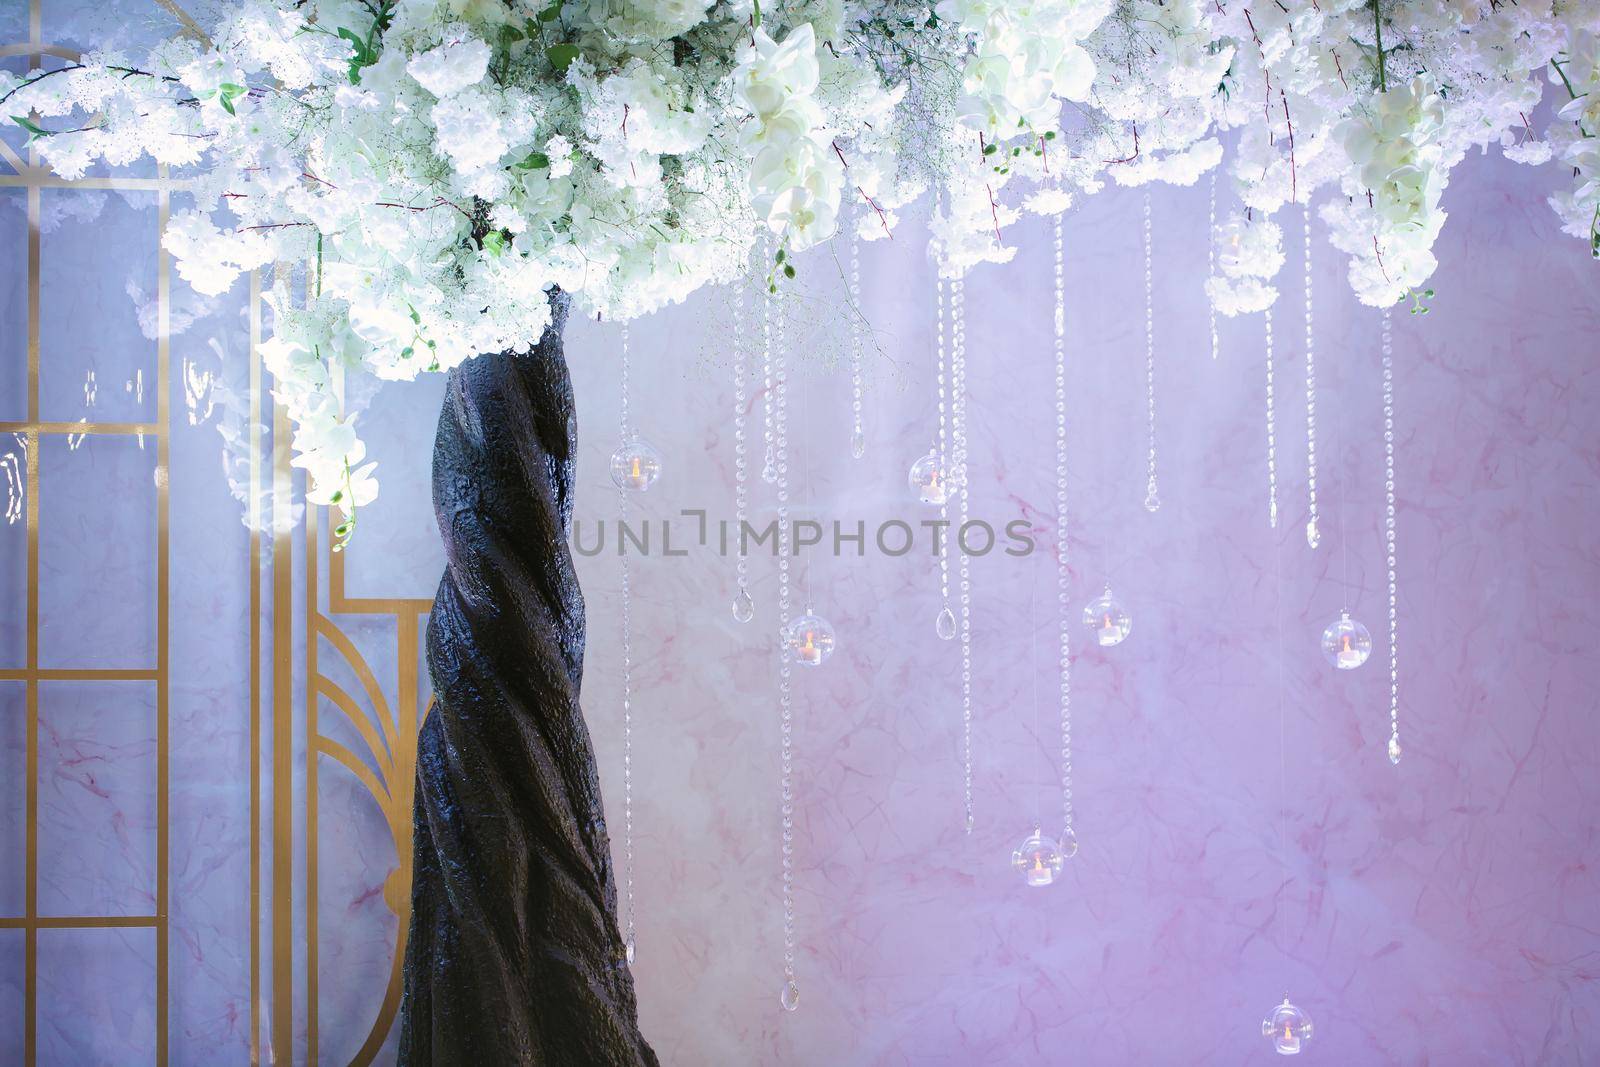 Hanging glass and shiny beads are an element of the wedding decor by StudioPeace